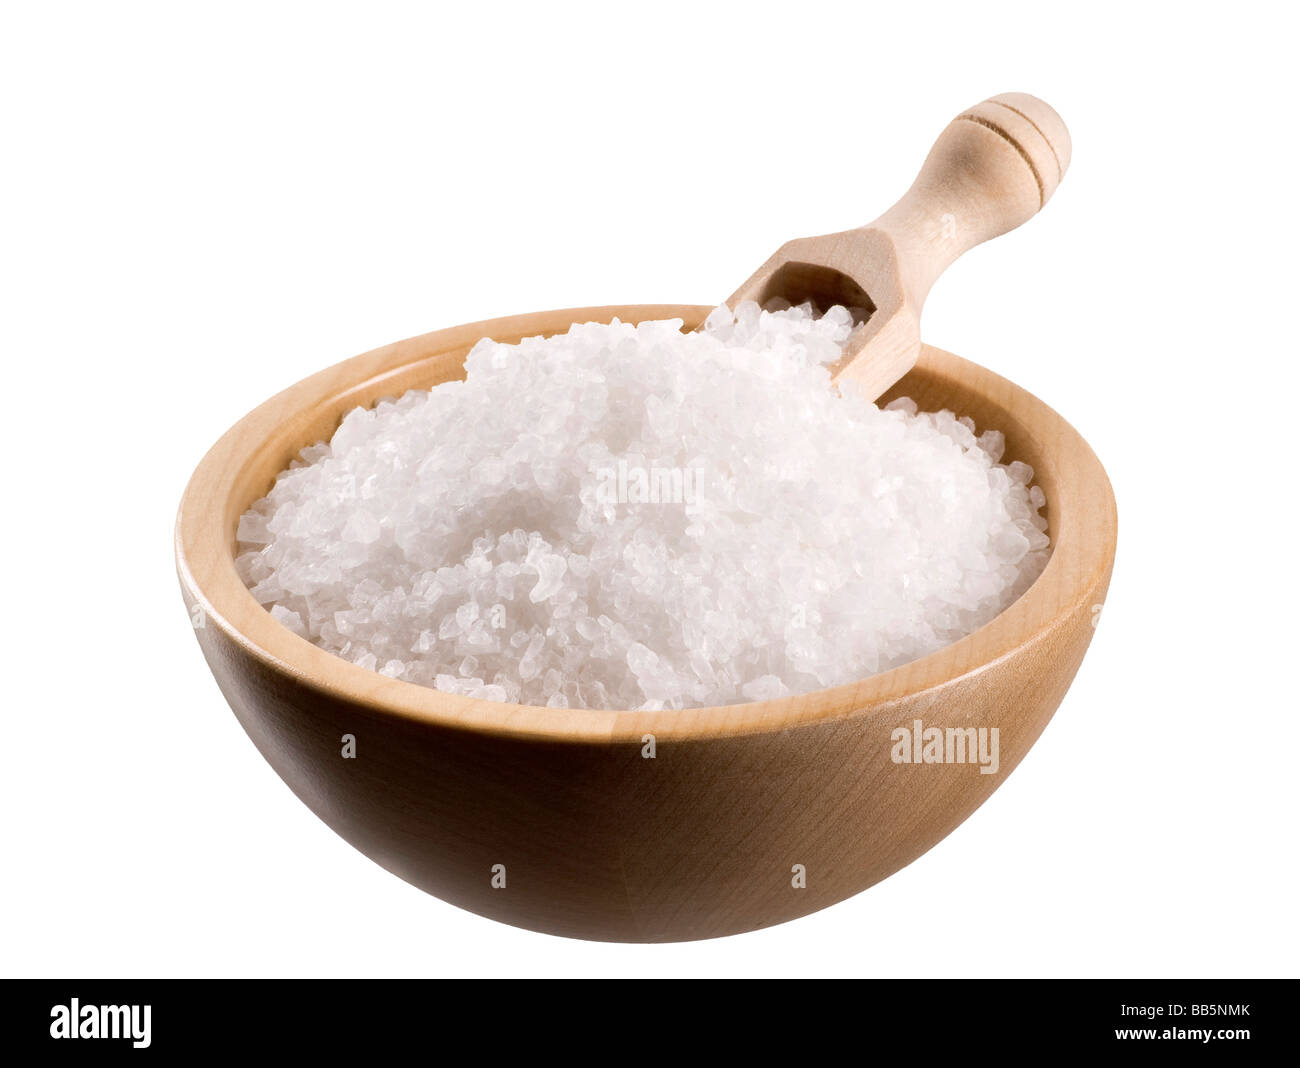 Sea salt in a wooden bowl Stock Photo